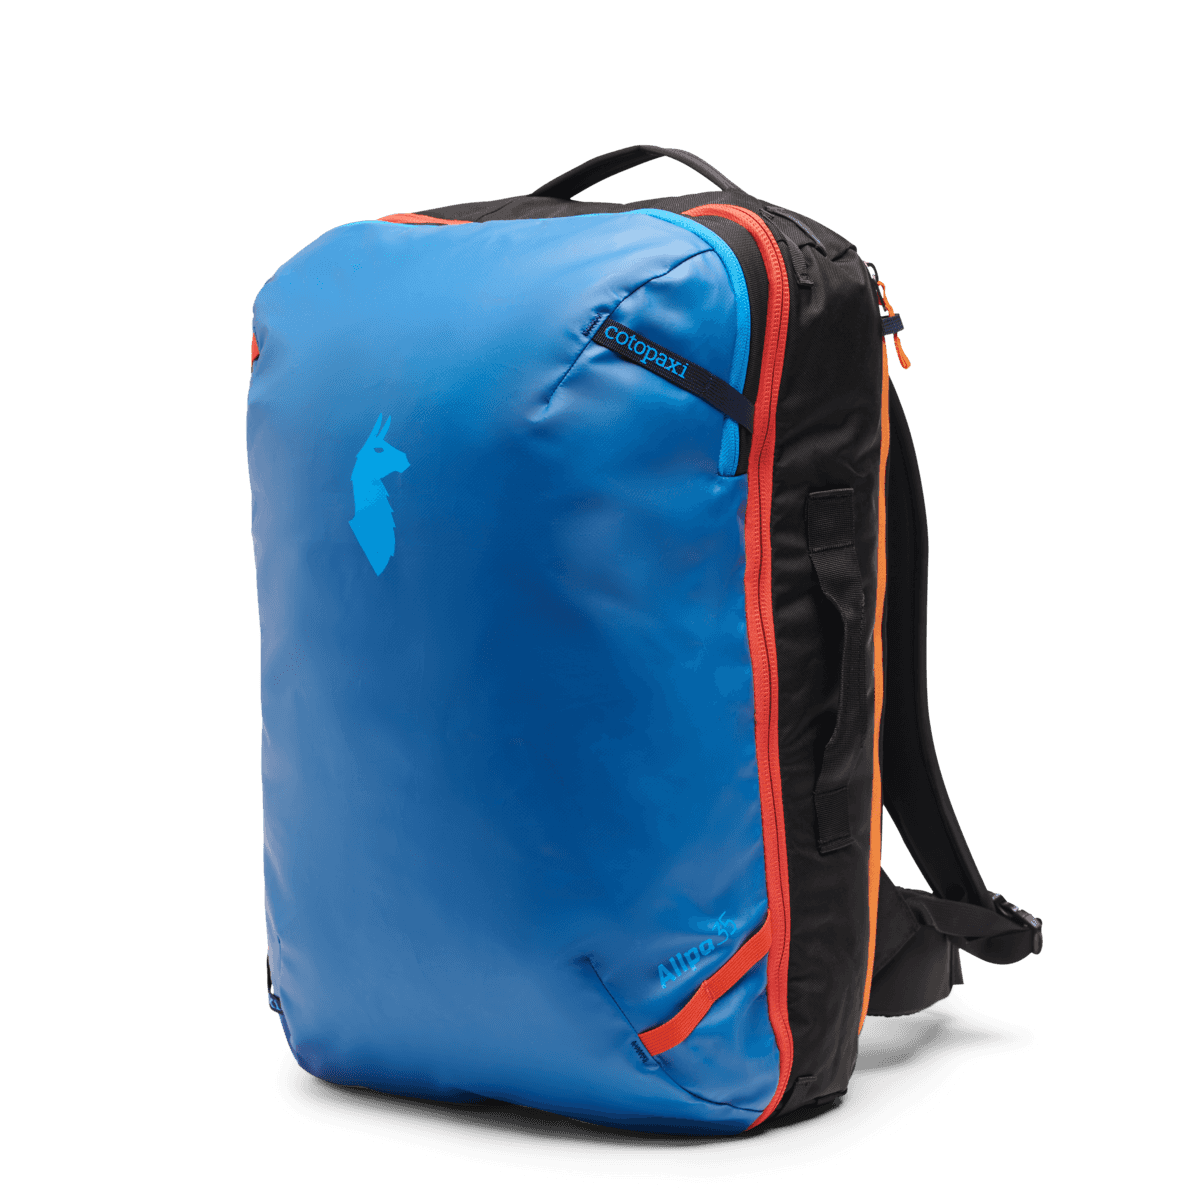 Cotopaxi Allpa 35L Travel Pack in Pacific